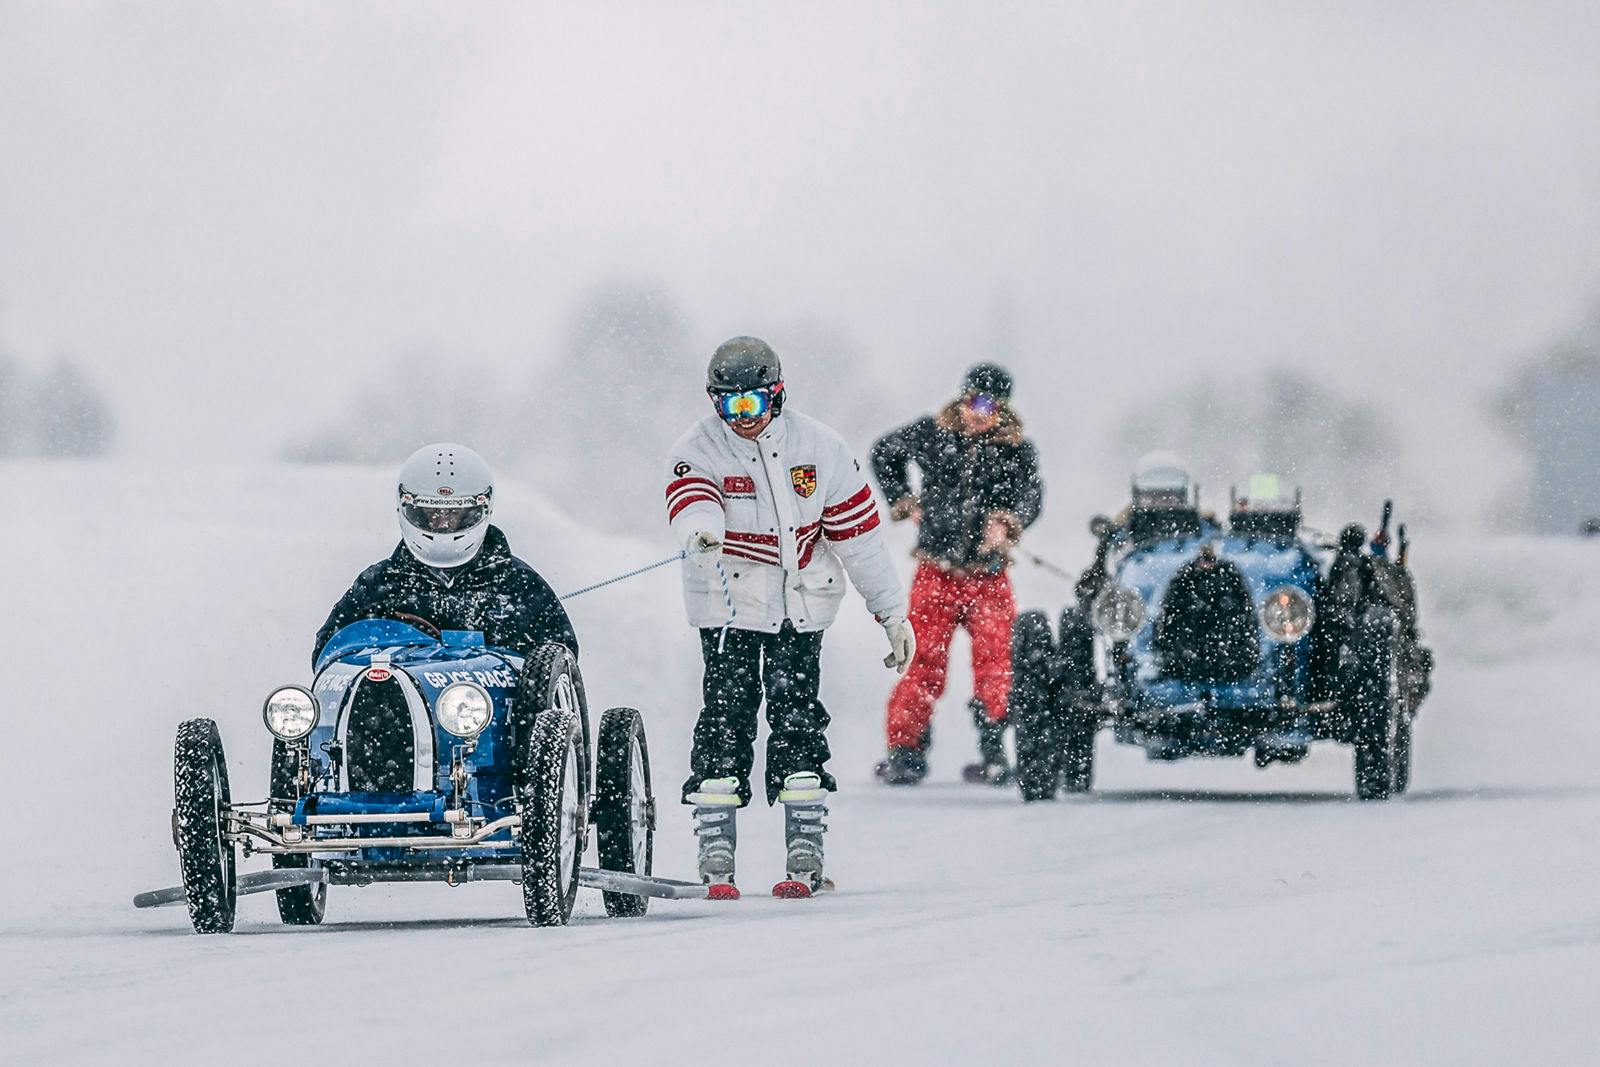 Sixty two years since Bugatti first took to the ice, the French luxury marque returned to Austria’s GP Ice Race with a Bugatti Type 51 and Bugatti Baby II.